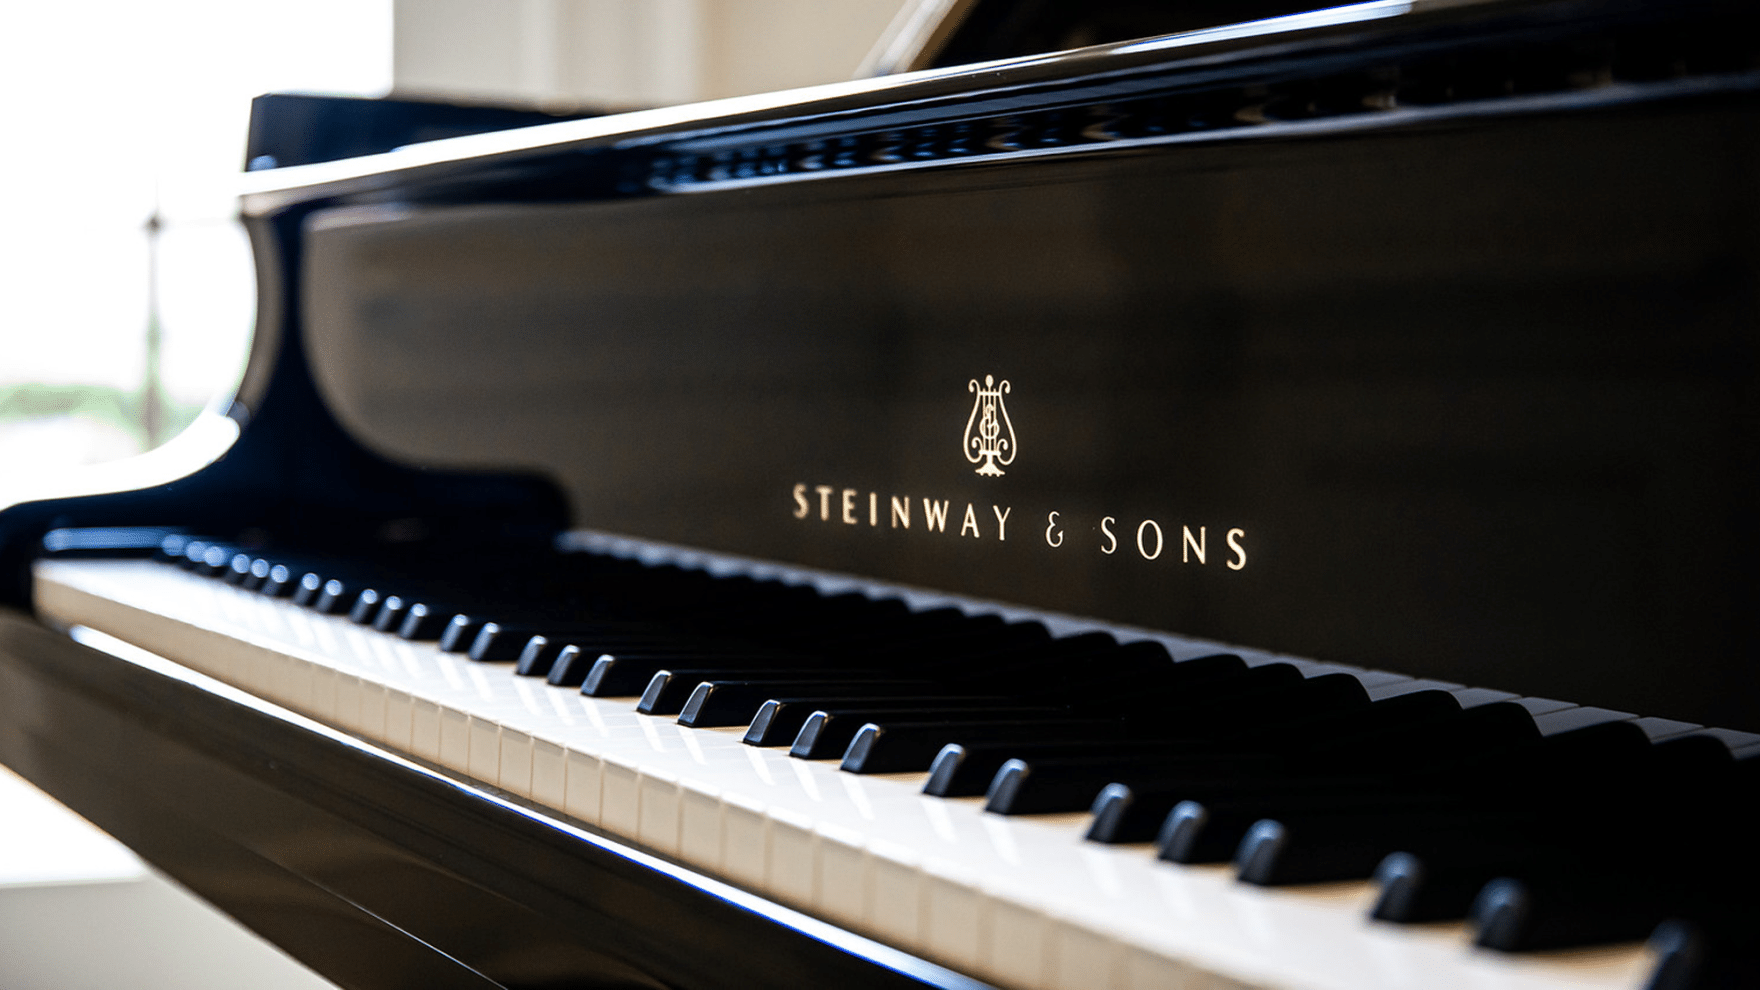 Steinway & Sons Showcases Its Most Innovative Piano, The Spirio|r, at Regent University - Surprise birthday celebration for Dr. M.G. “Pat” Robertson